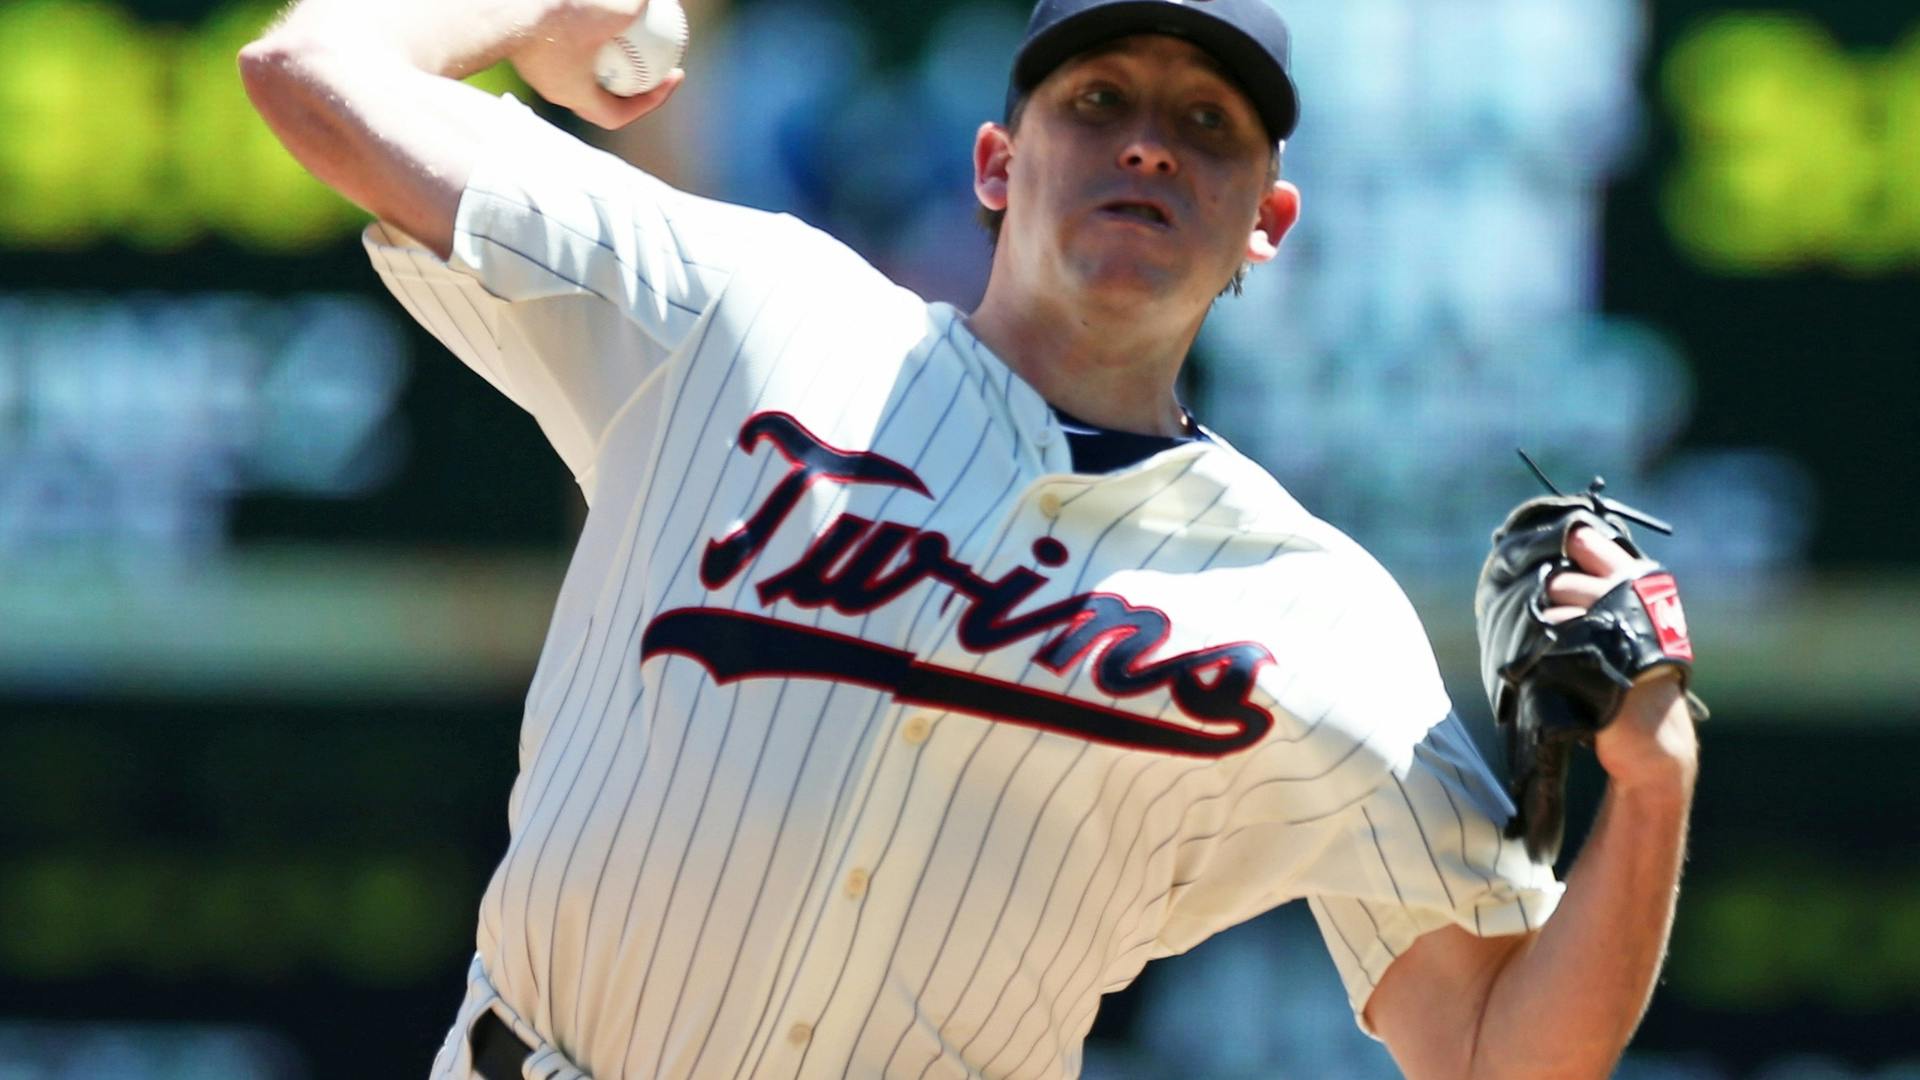 Kevin Correia pitched six innings in the Twins 4-3 victory over the White Sox on Sunday